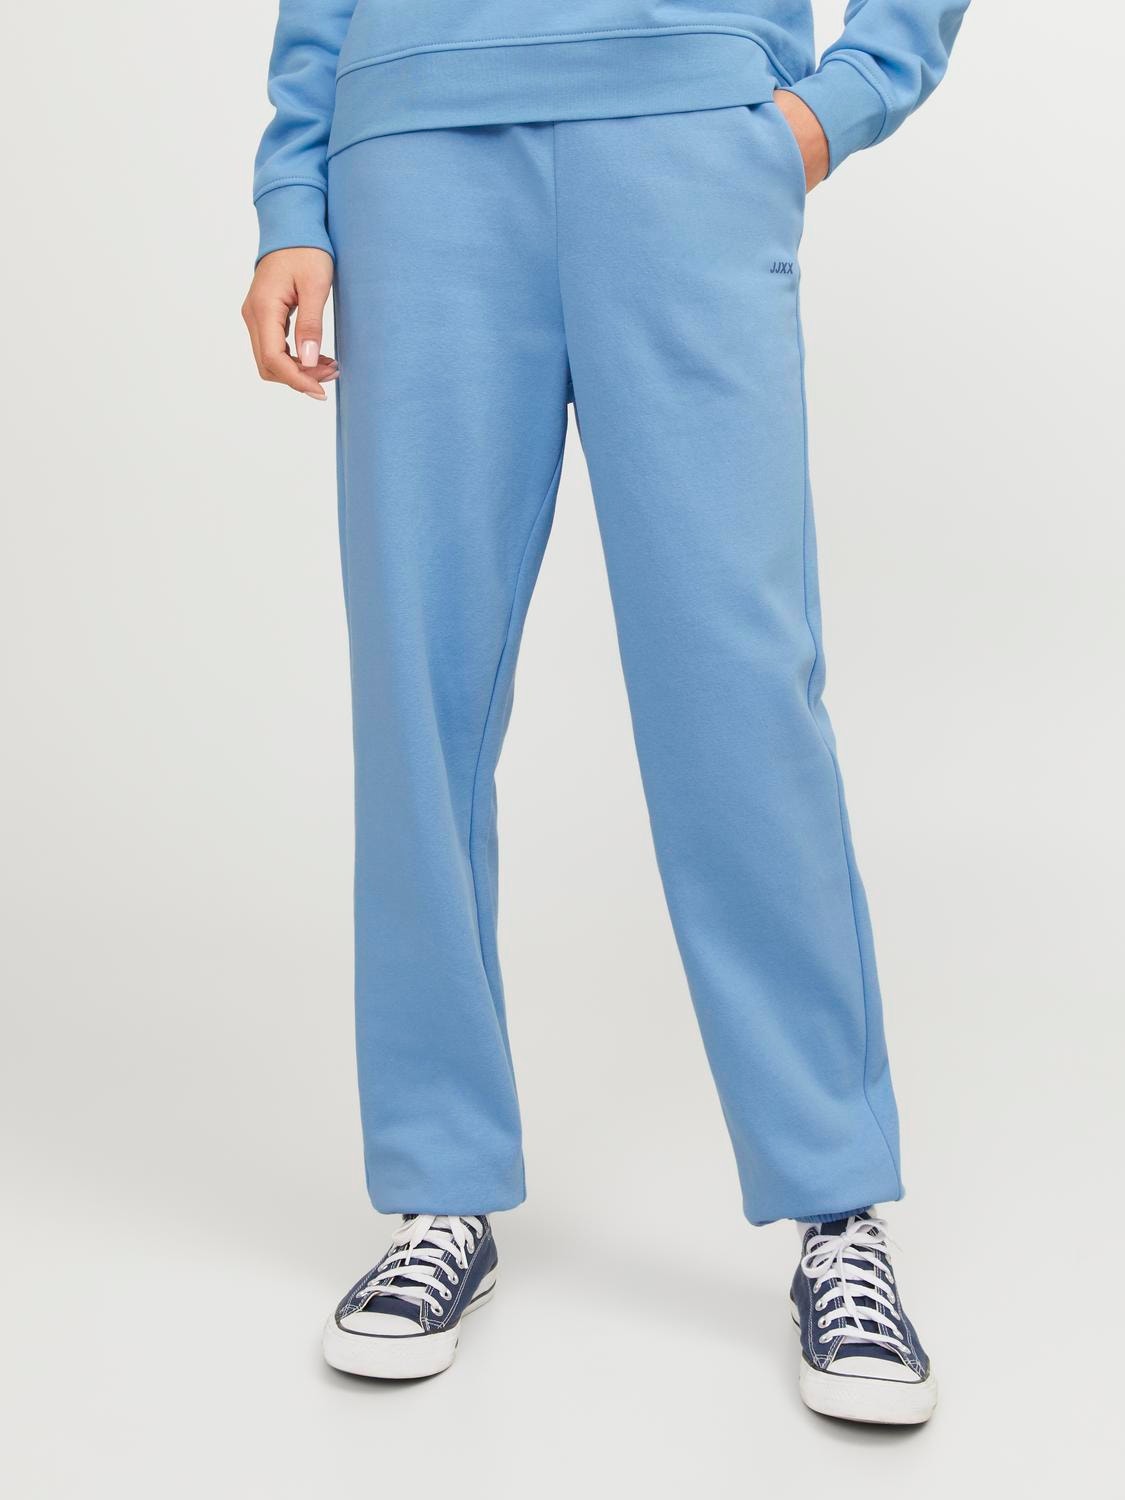 JJXX Παντελόνι Relaxed Fit Φόρμα -Silver Lake Blue - 12223960